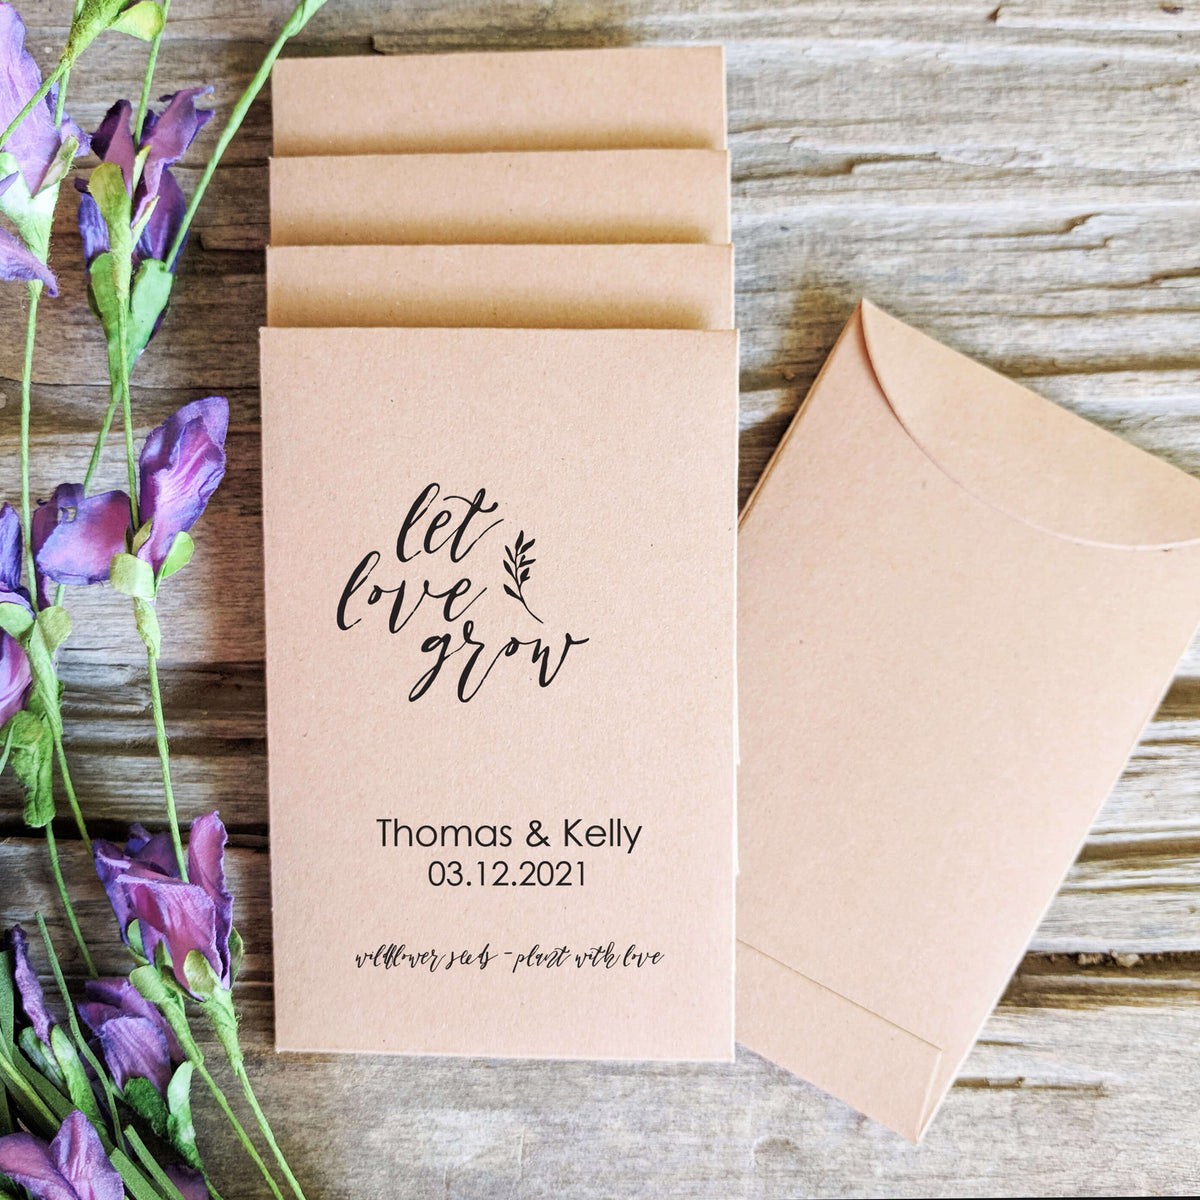 Personalised Wedding Flower Seed Packets Envelopes Favour Brown Let Love Grow 